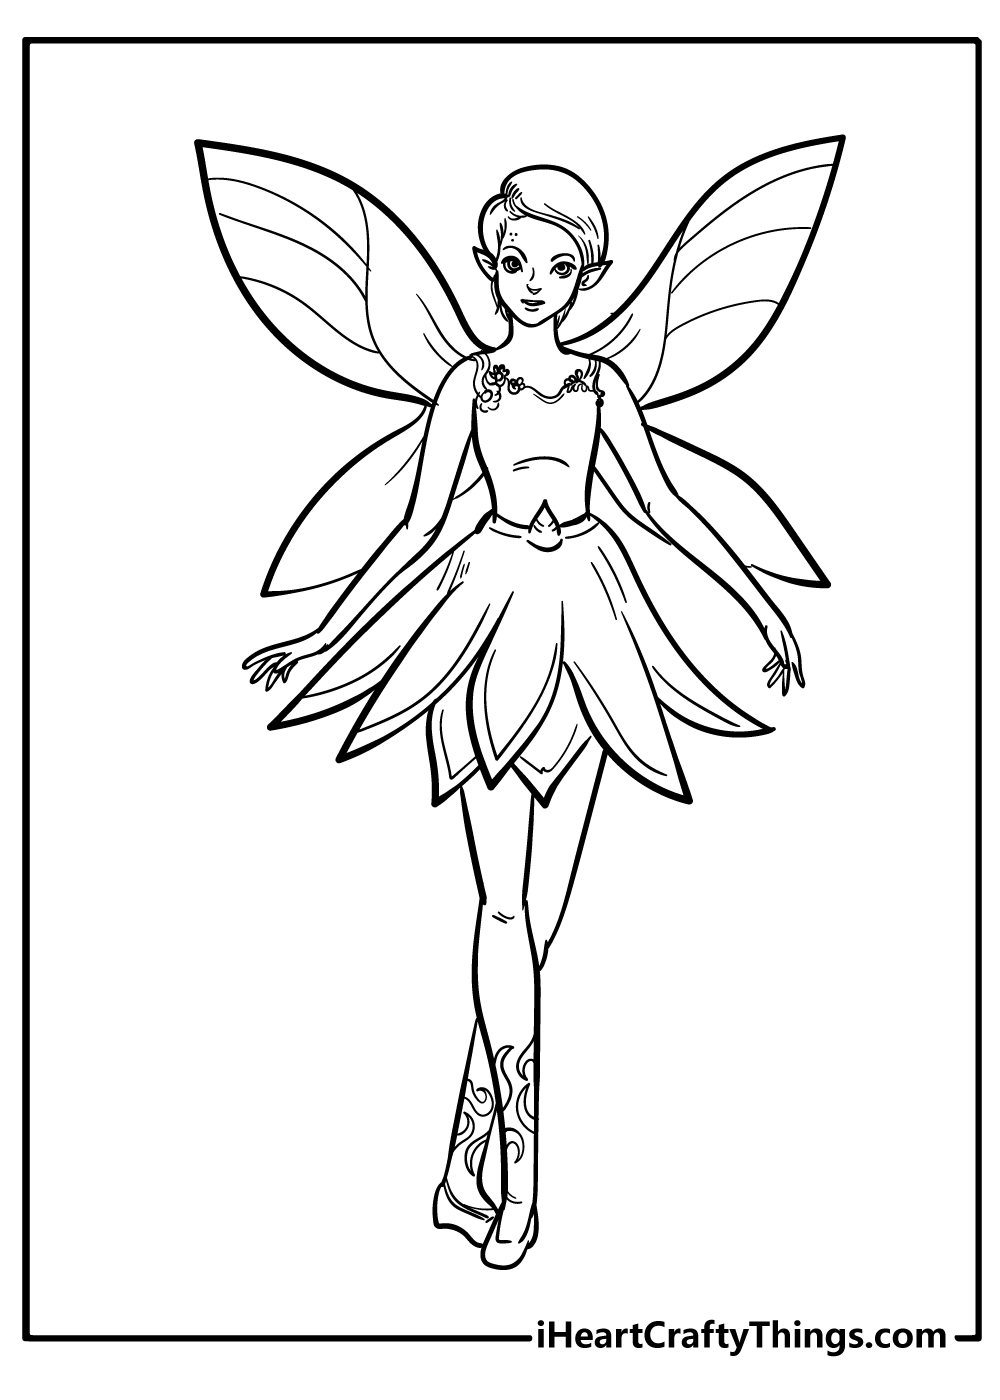 Printable Fairy Coloring Pages Updated 20